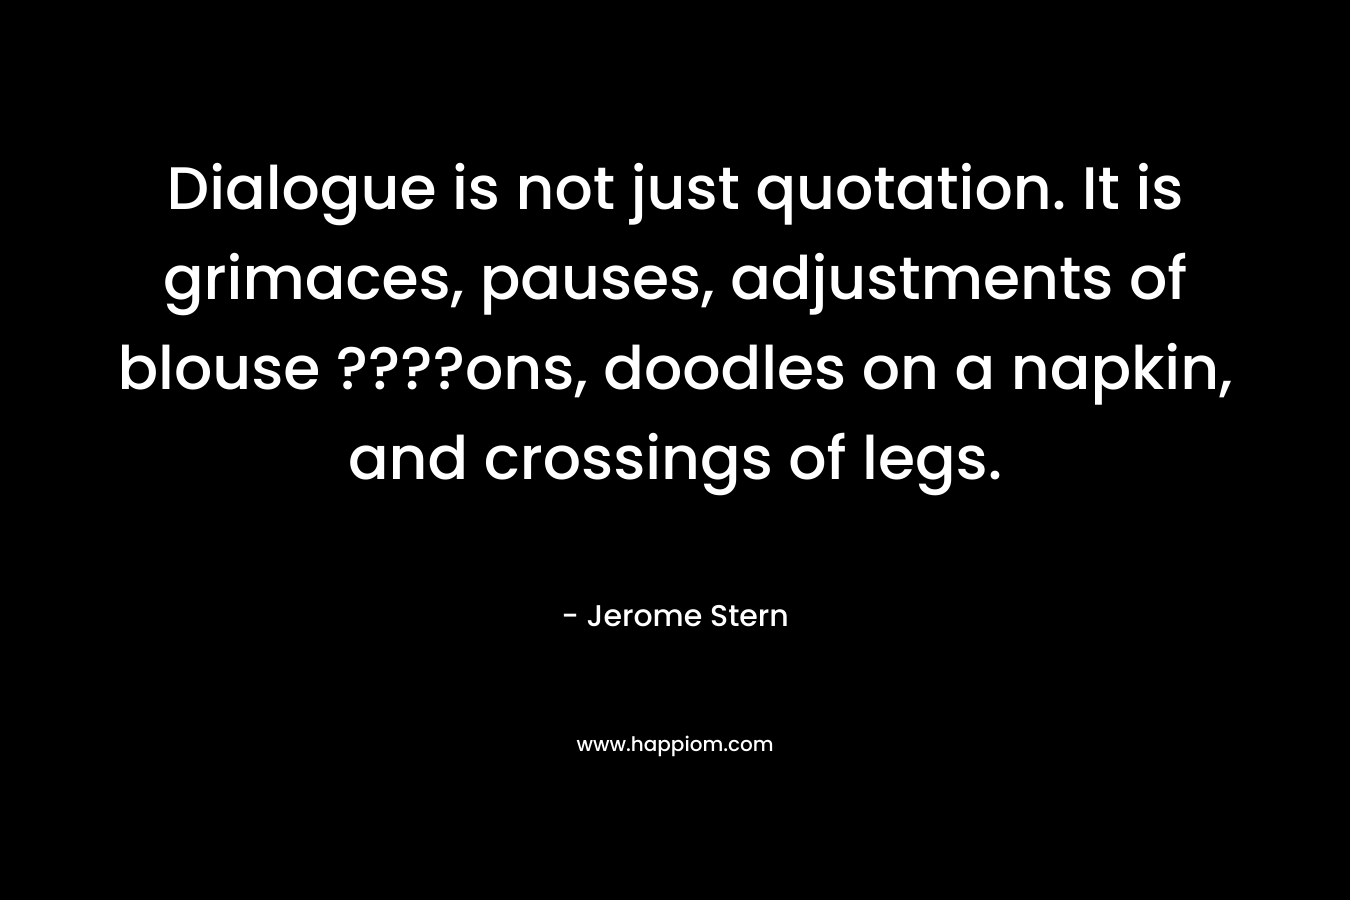 Dialogue is not just quotation. It is grimaces, pauses, adjustments of blouse ????ons, doodles on a napkin, and crossings of legs. – Jerome Stern